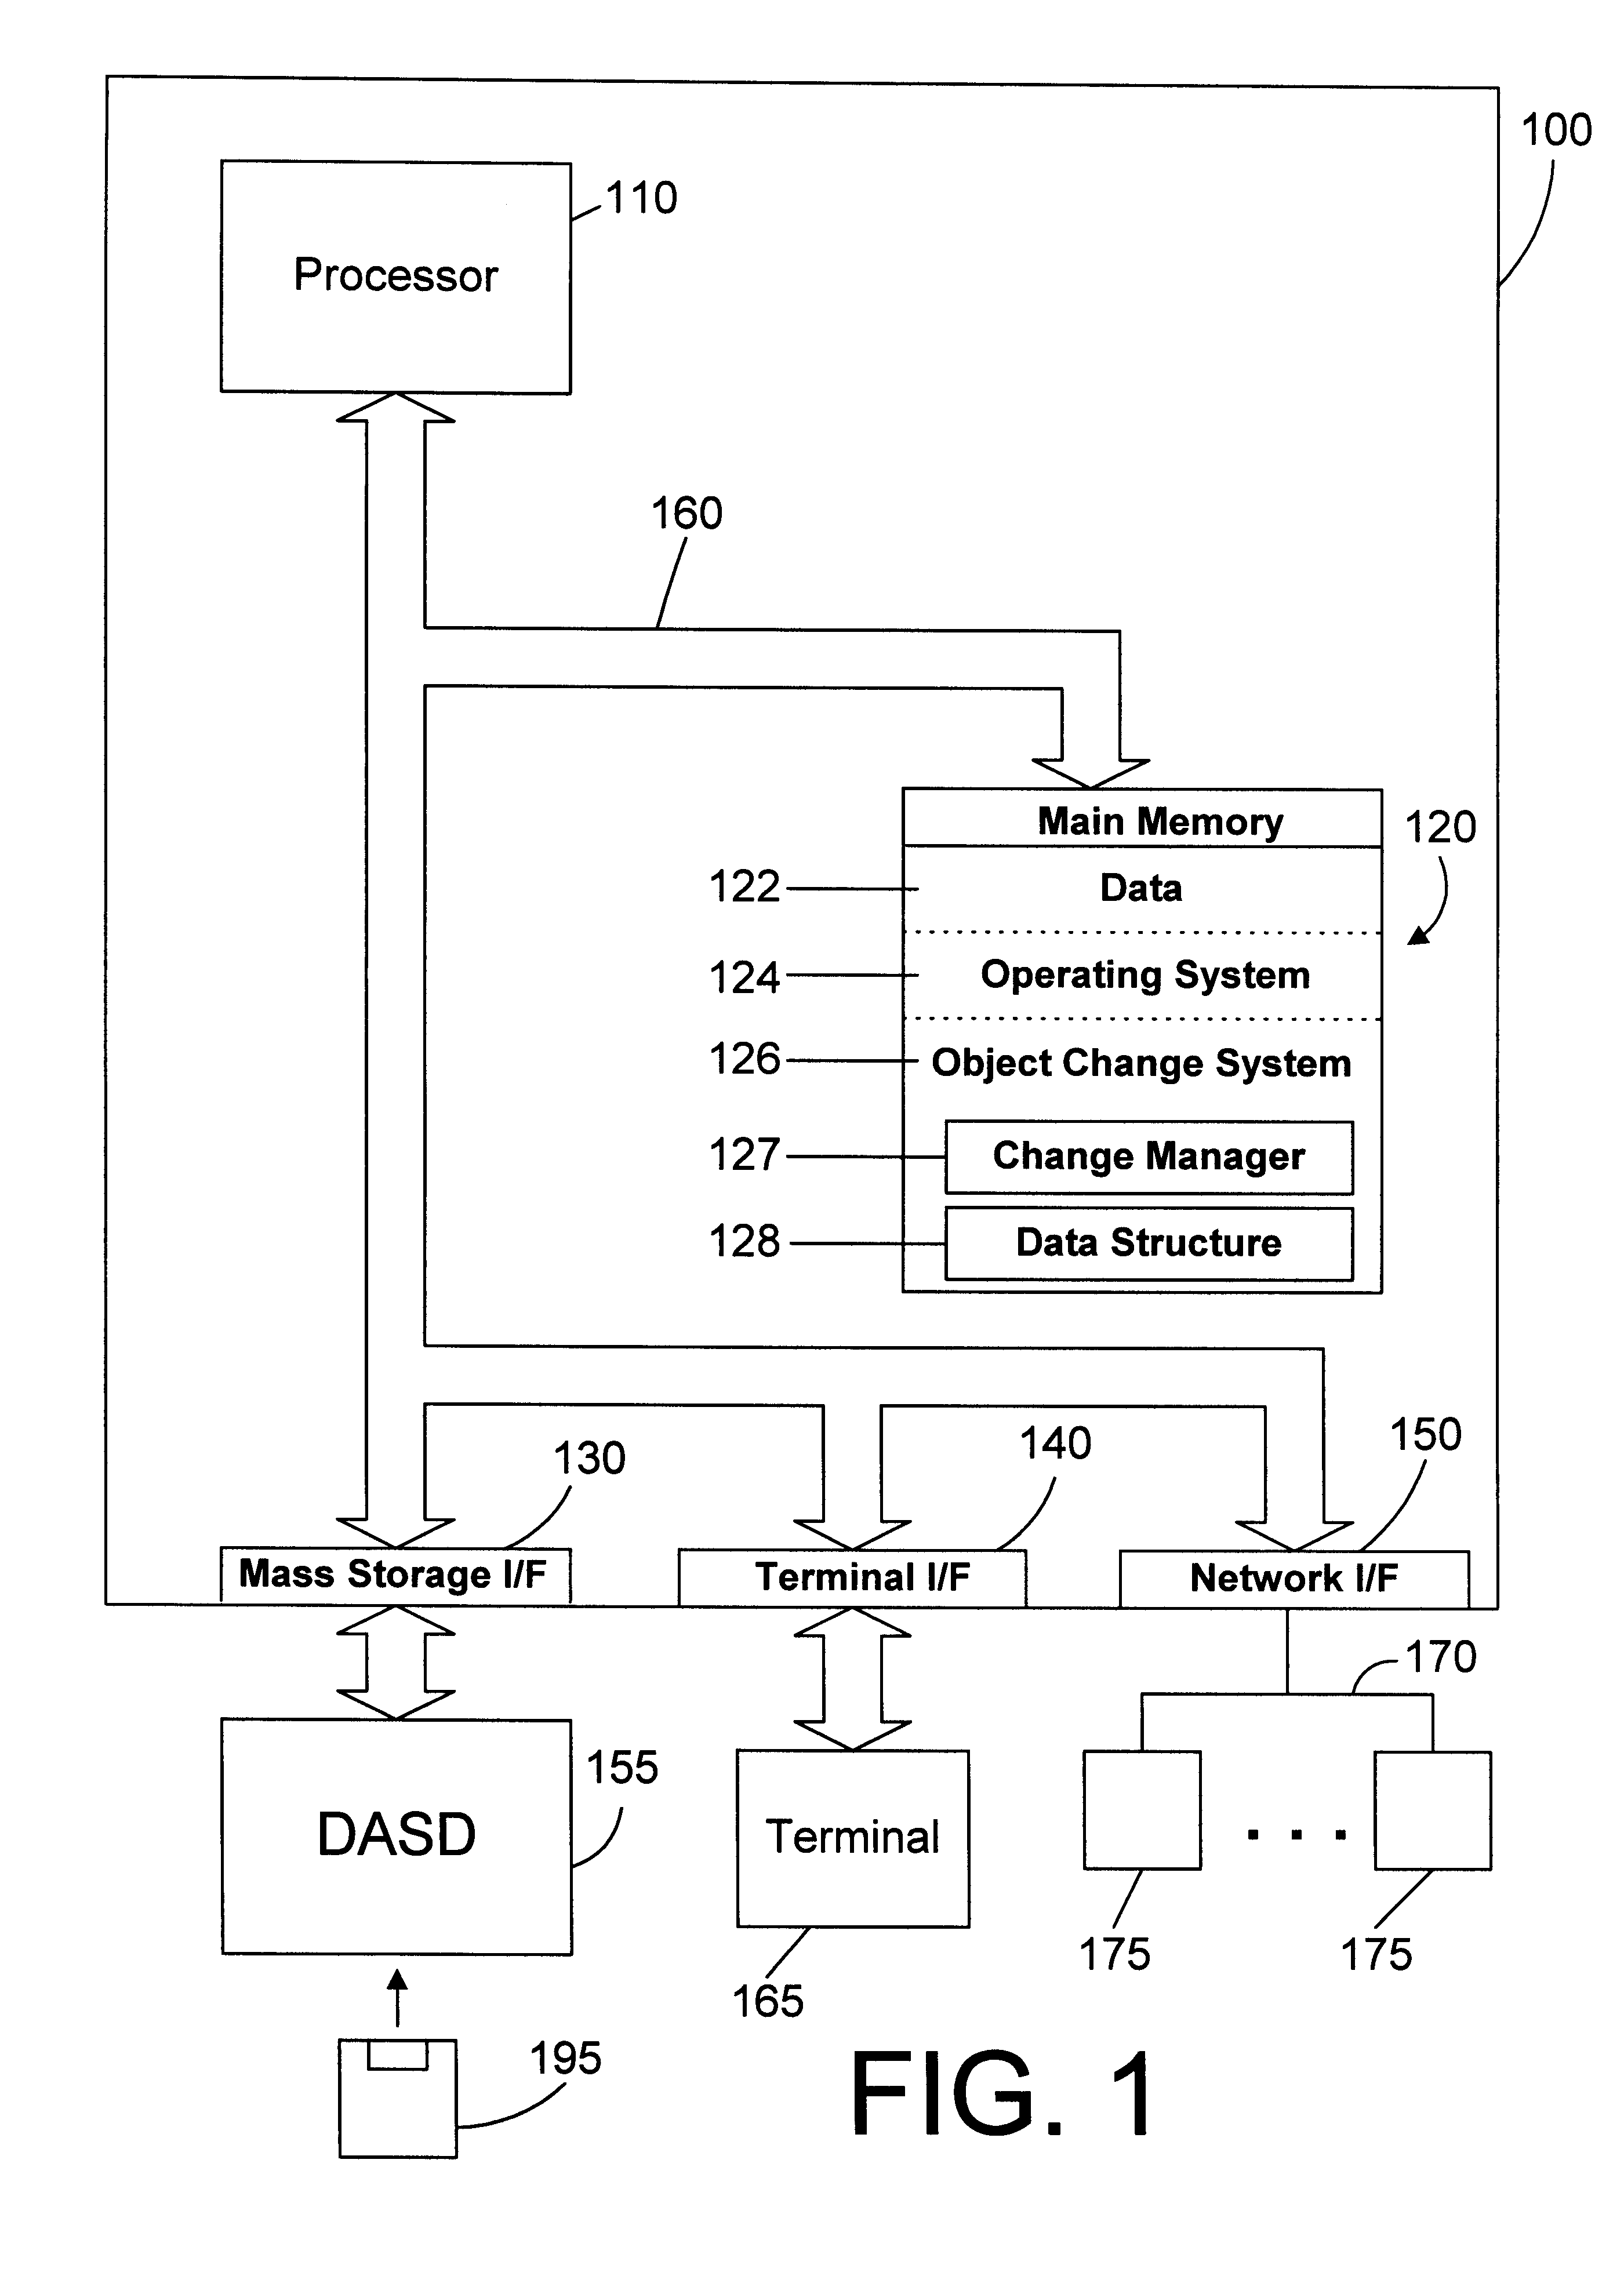 Apparatus and method for automatically propagating a change made to at least one of a plurality of objects to at least one data structure containing data relating to the plurality of objects